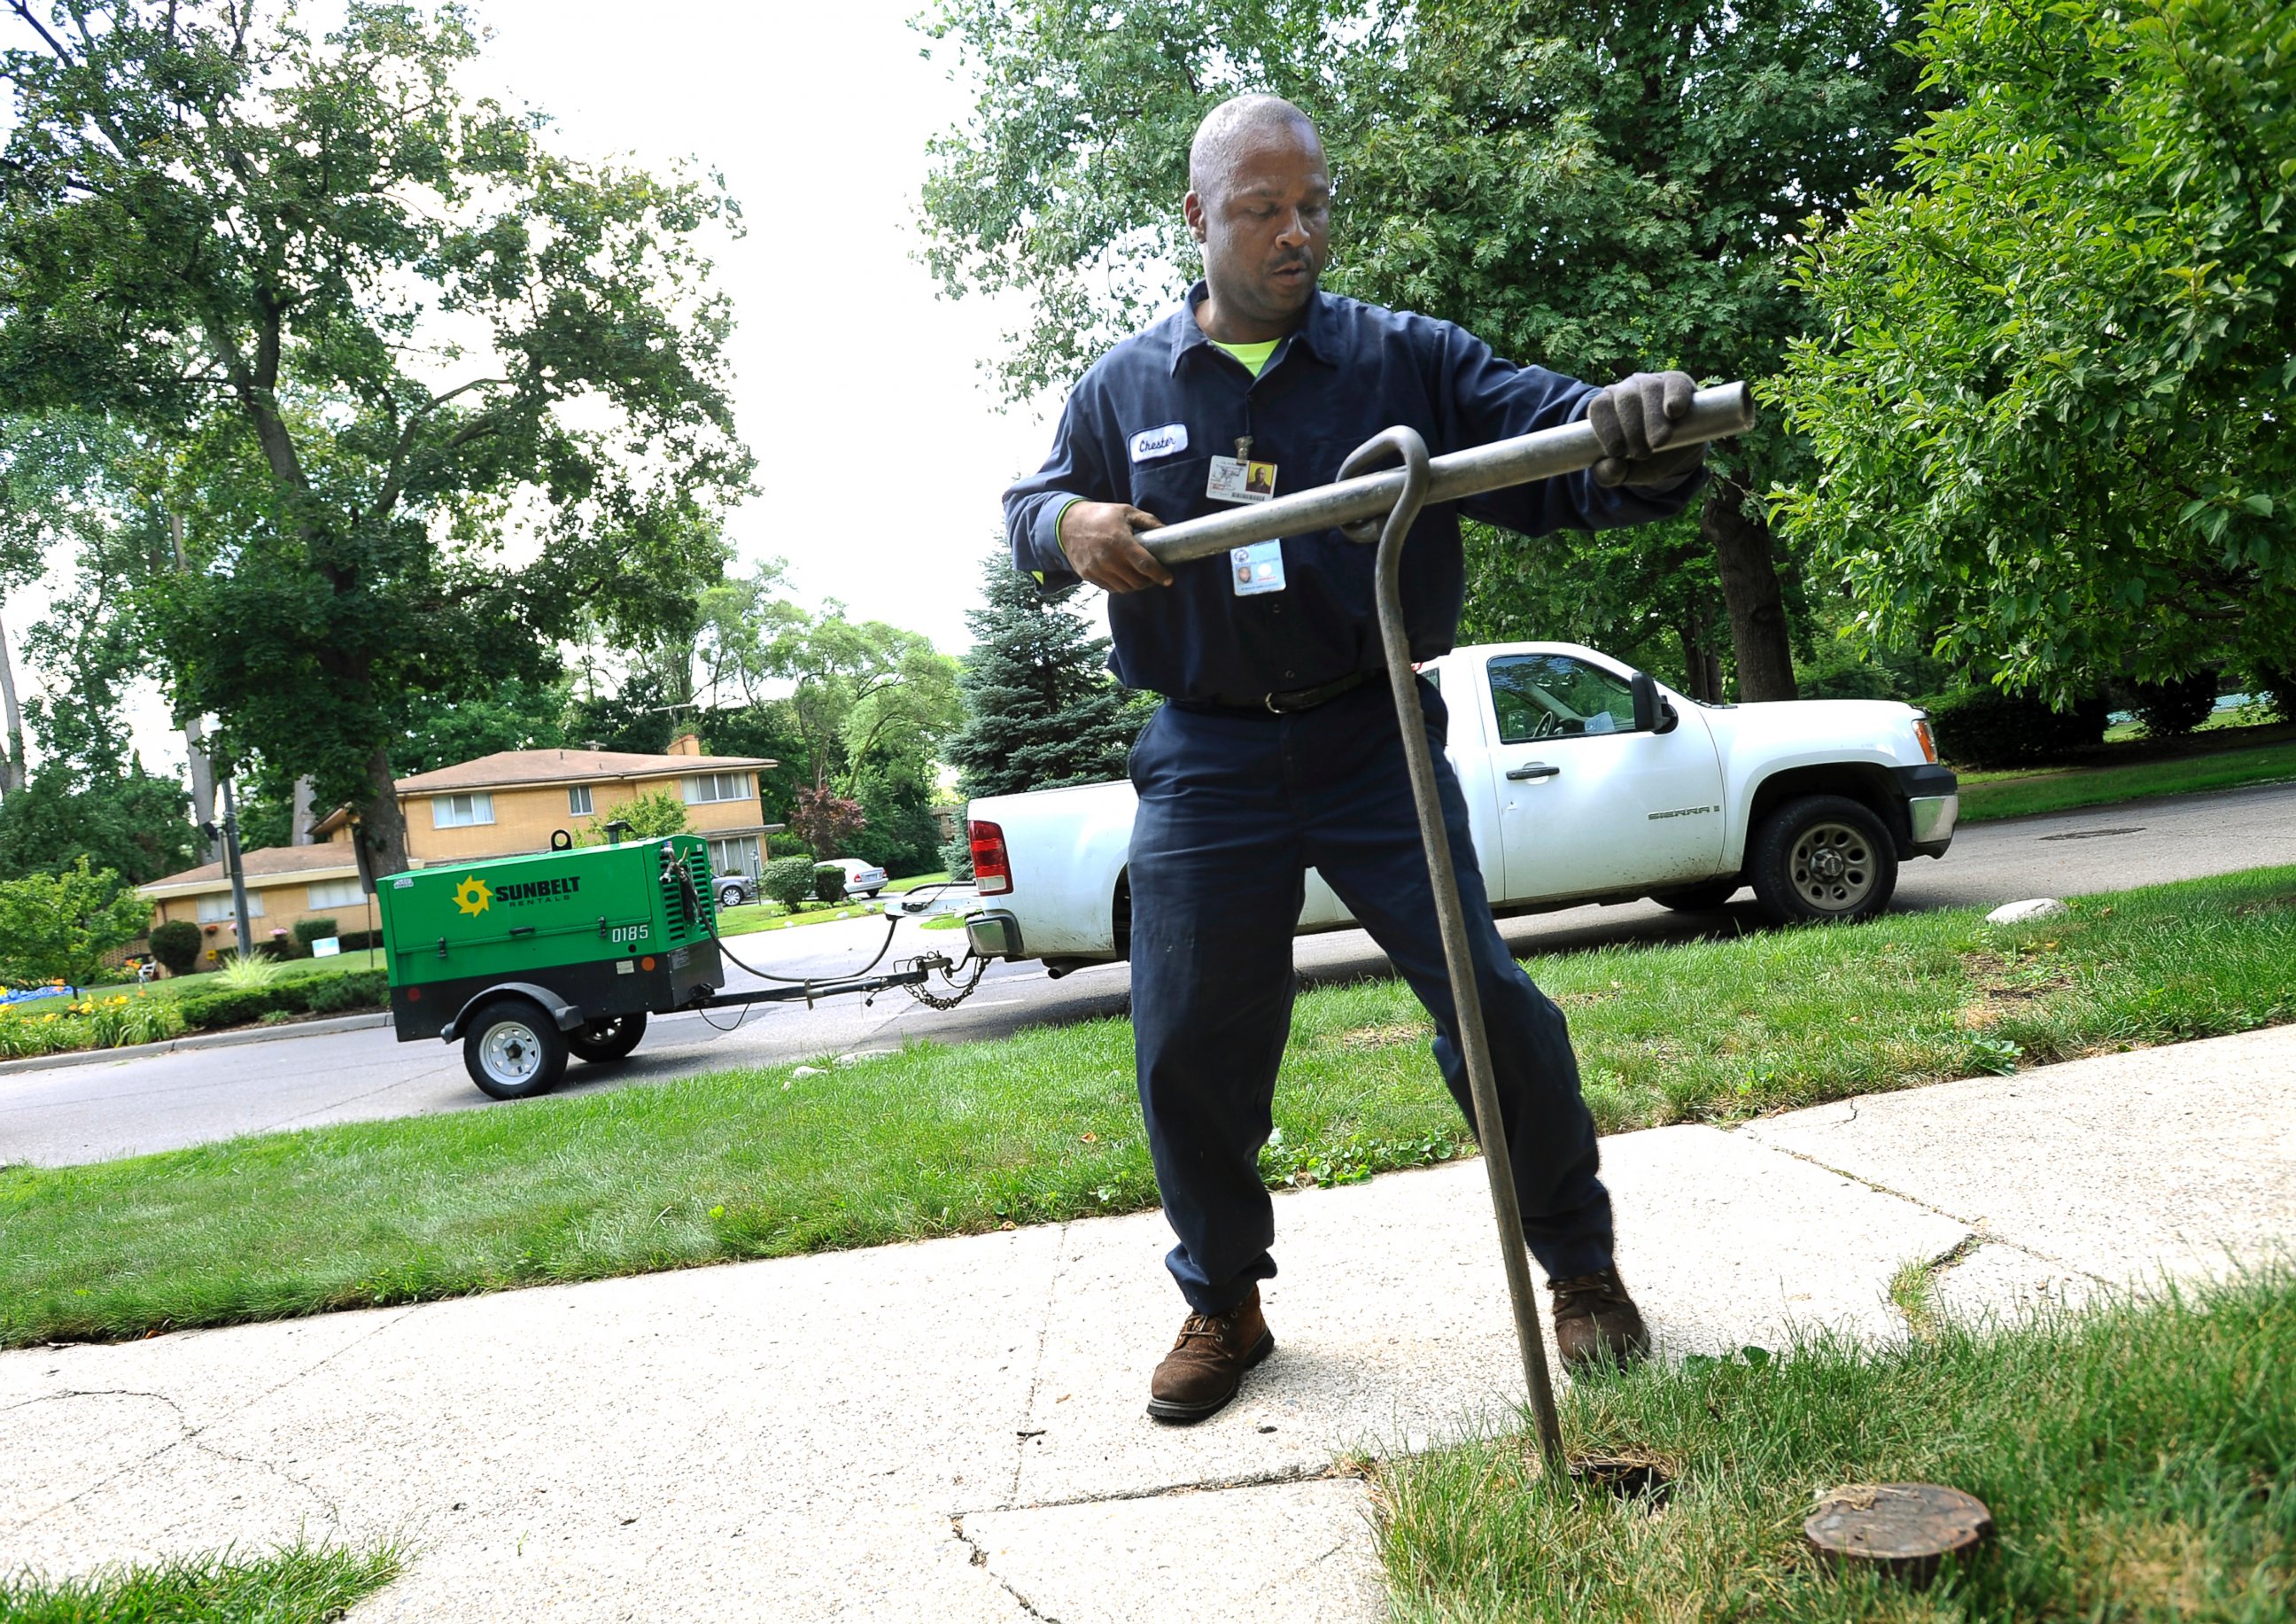 PHOTO: In this July 8, 2014 file photo, Chester Clemons, a water shut-off technician for the city of Detroit, shuts off the water at a home in the Palmer Woods neighborhood of Detroit.  